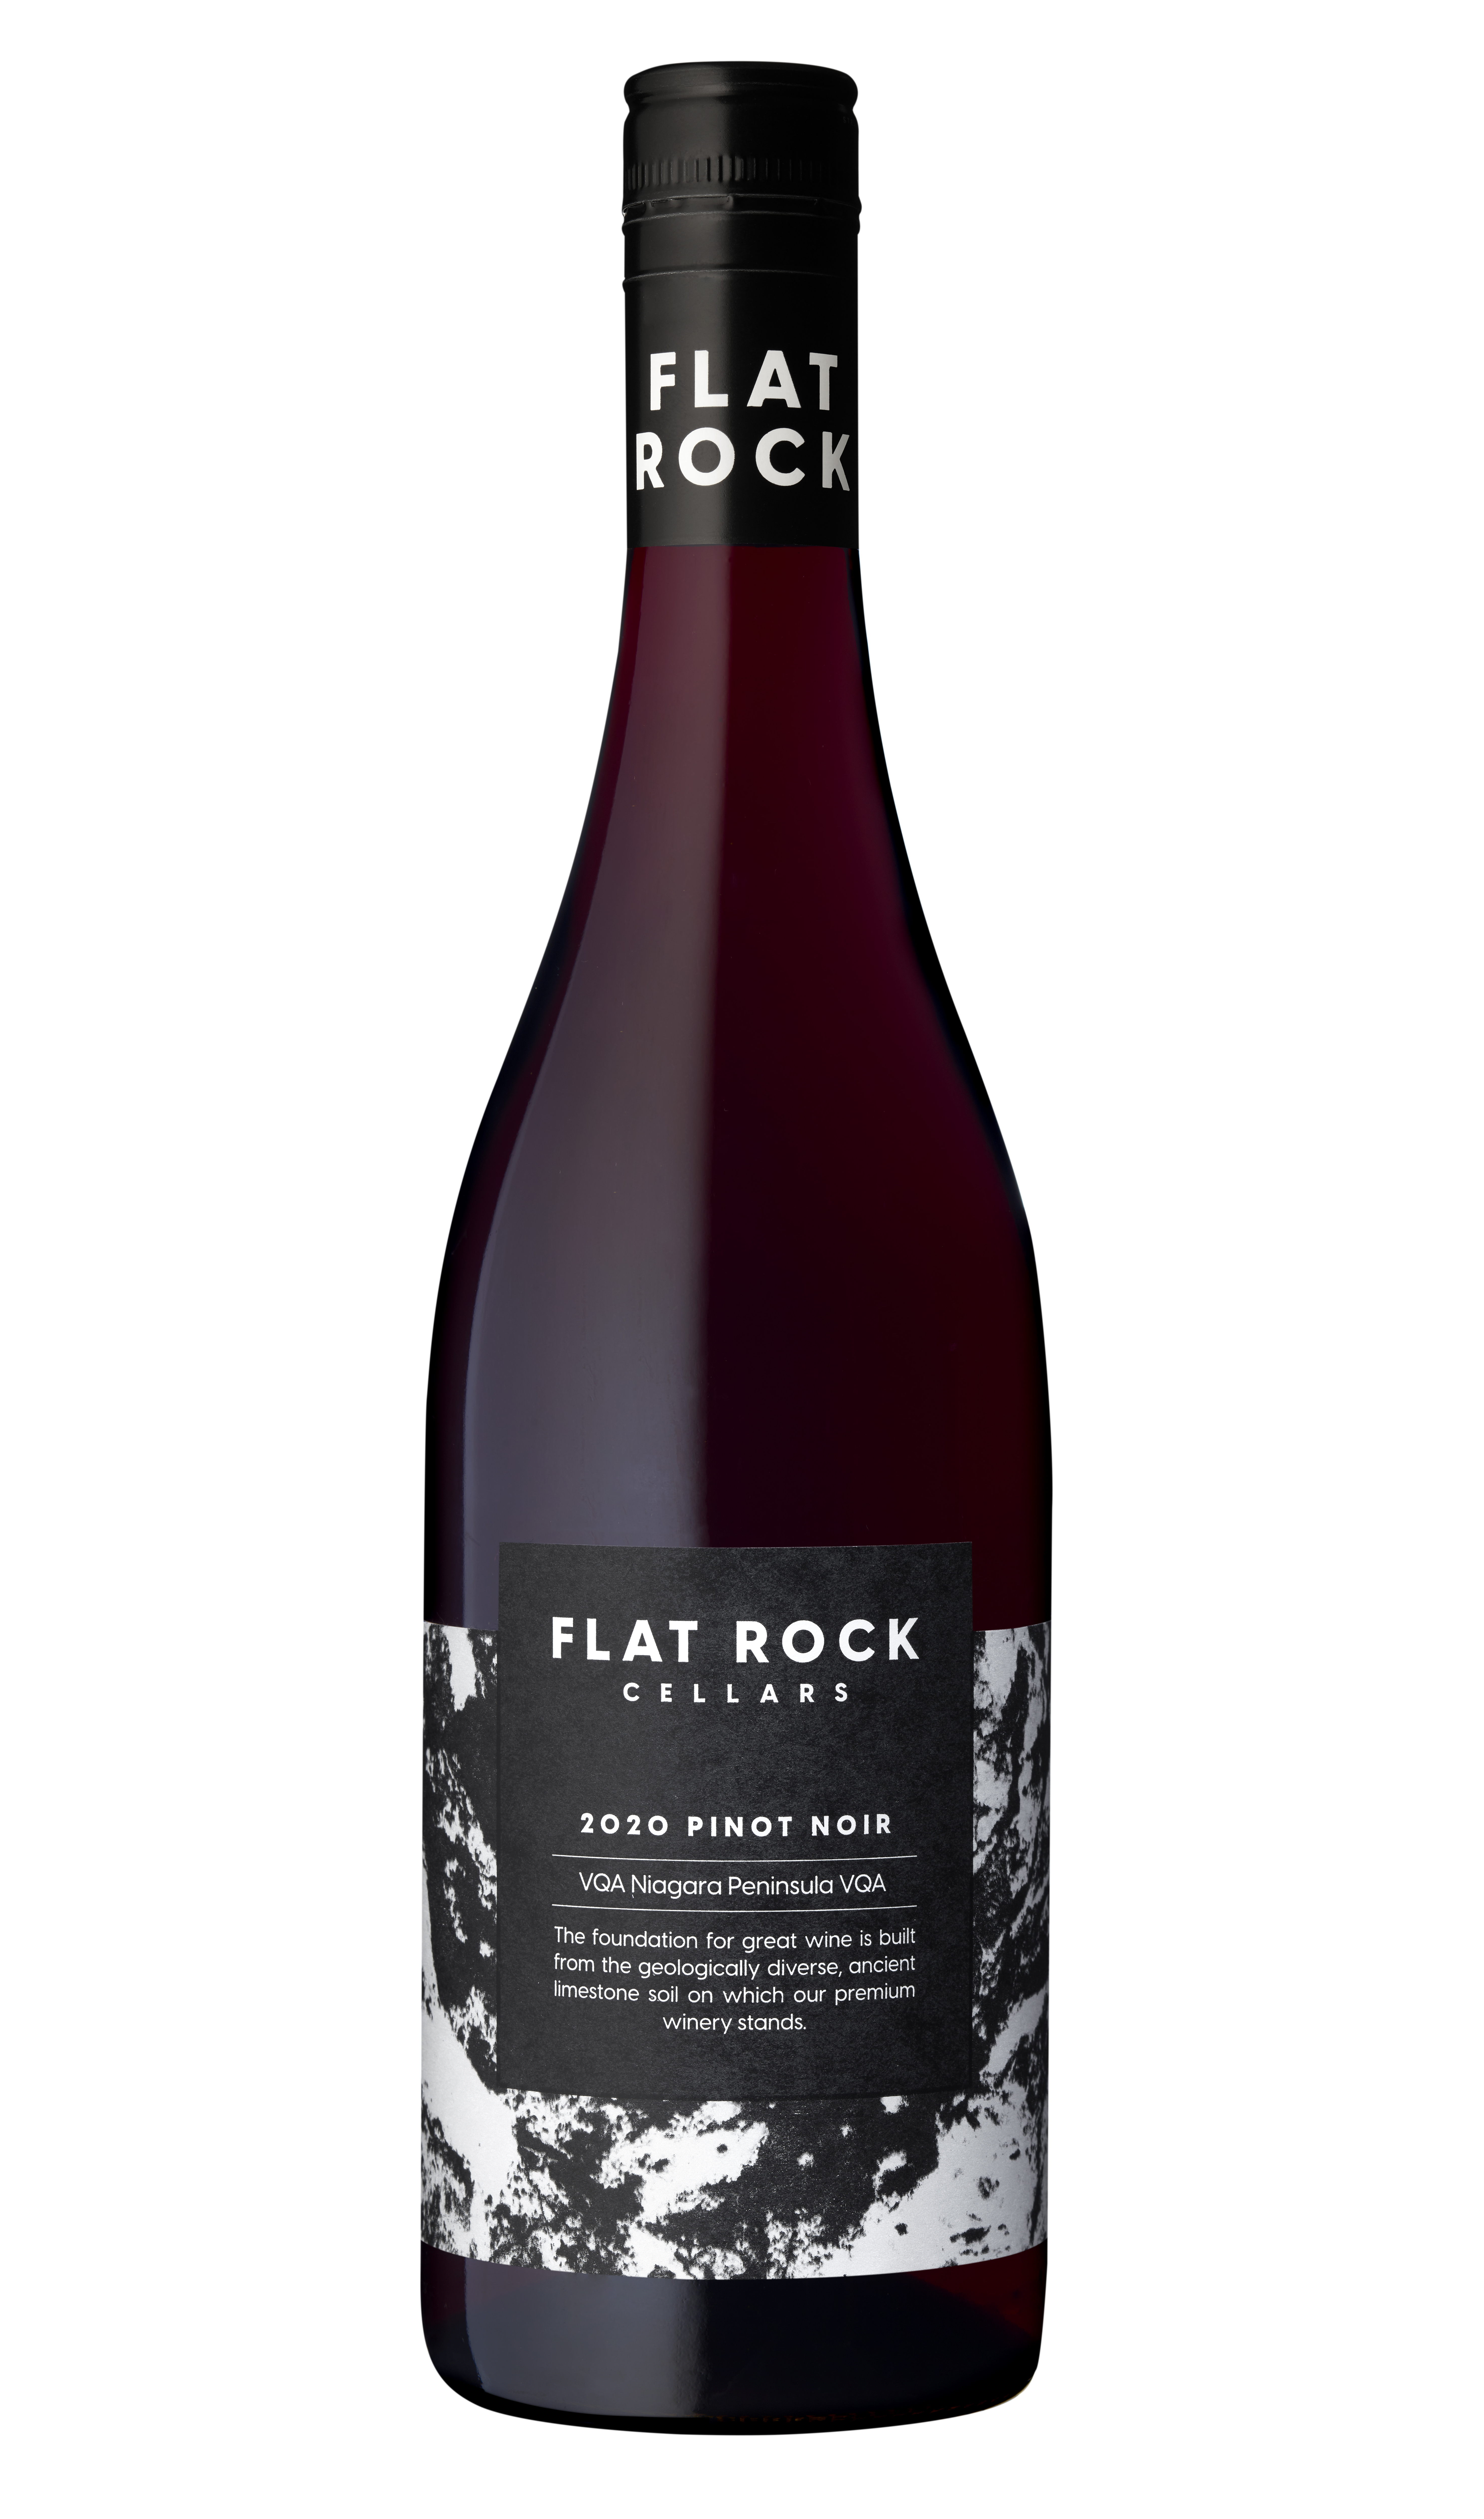 Product Image for 2021 Pinot Noir